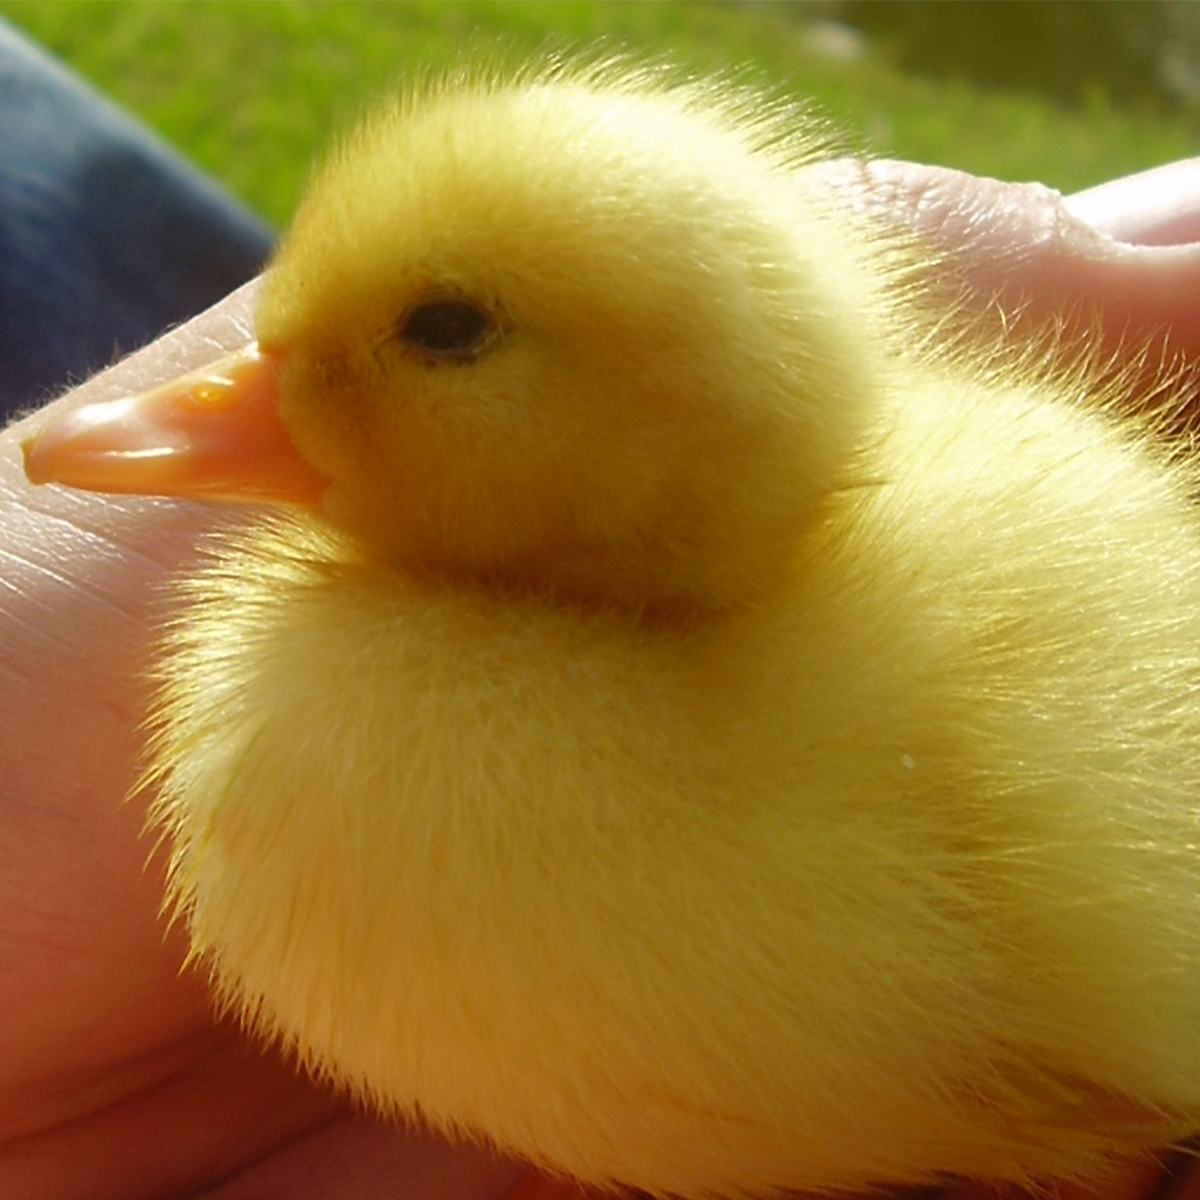 A closeup photo of a duckling in a person's hand.